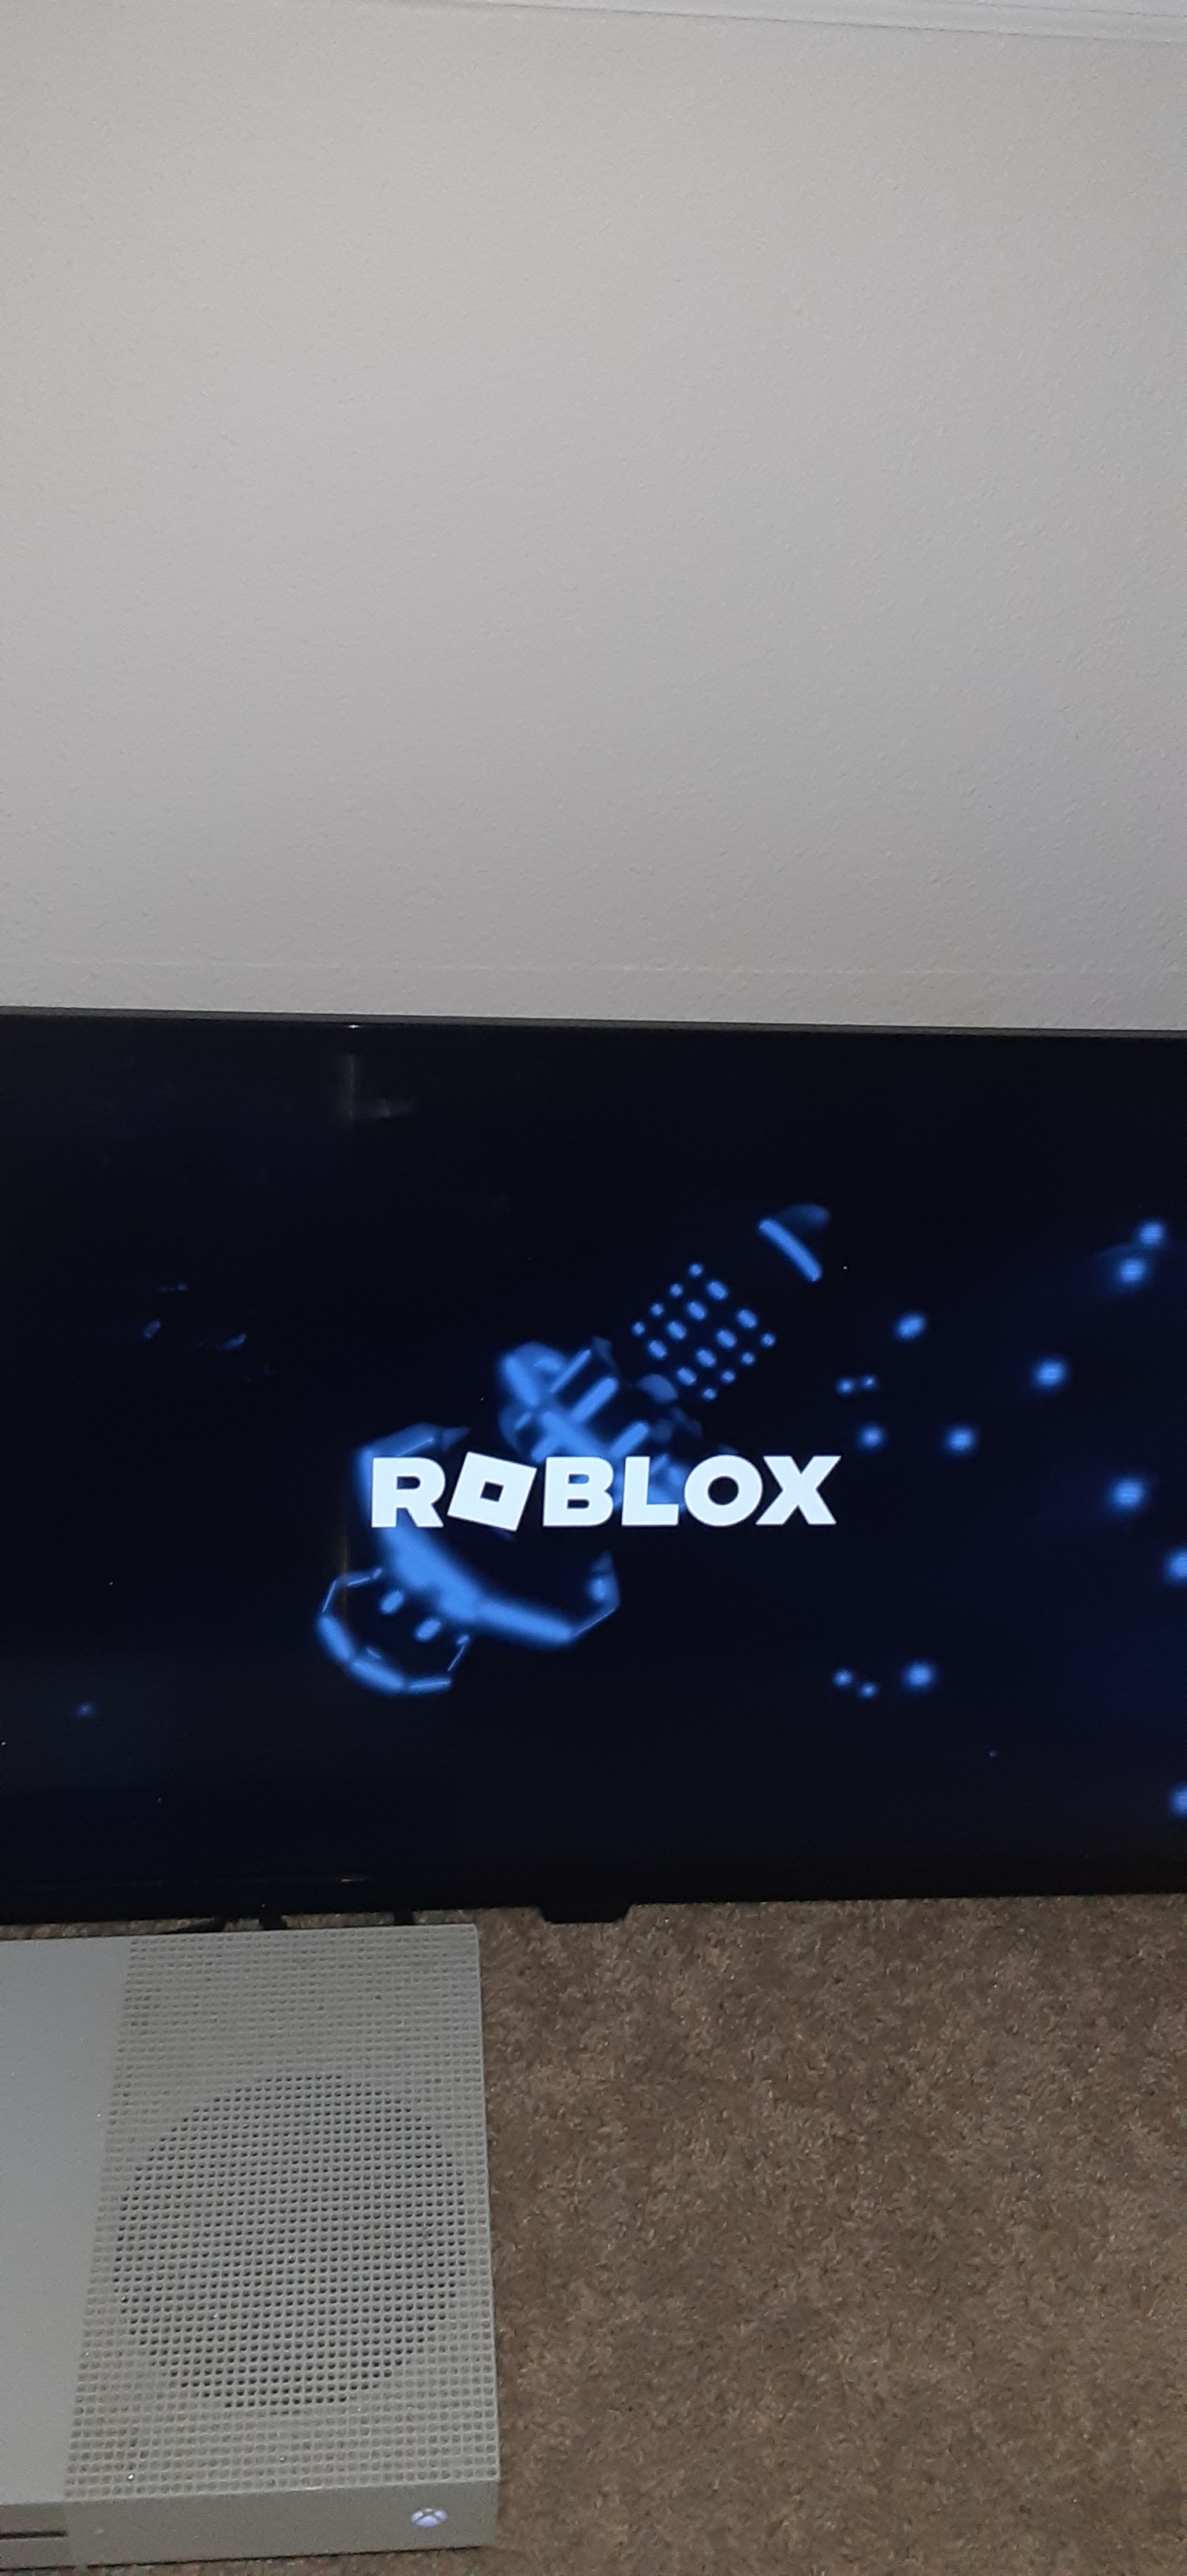 Guys! Playing Roblox on my Ps5.